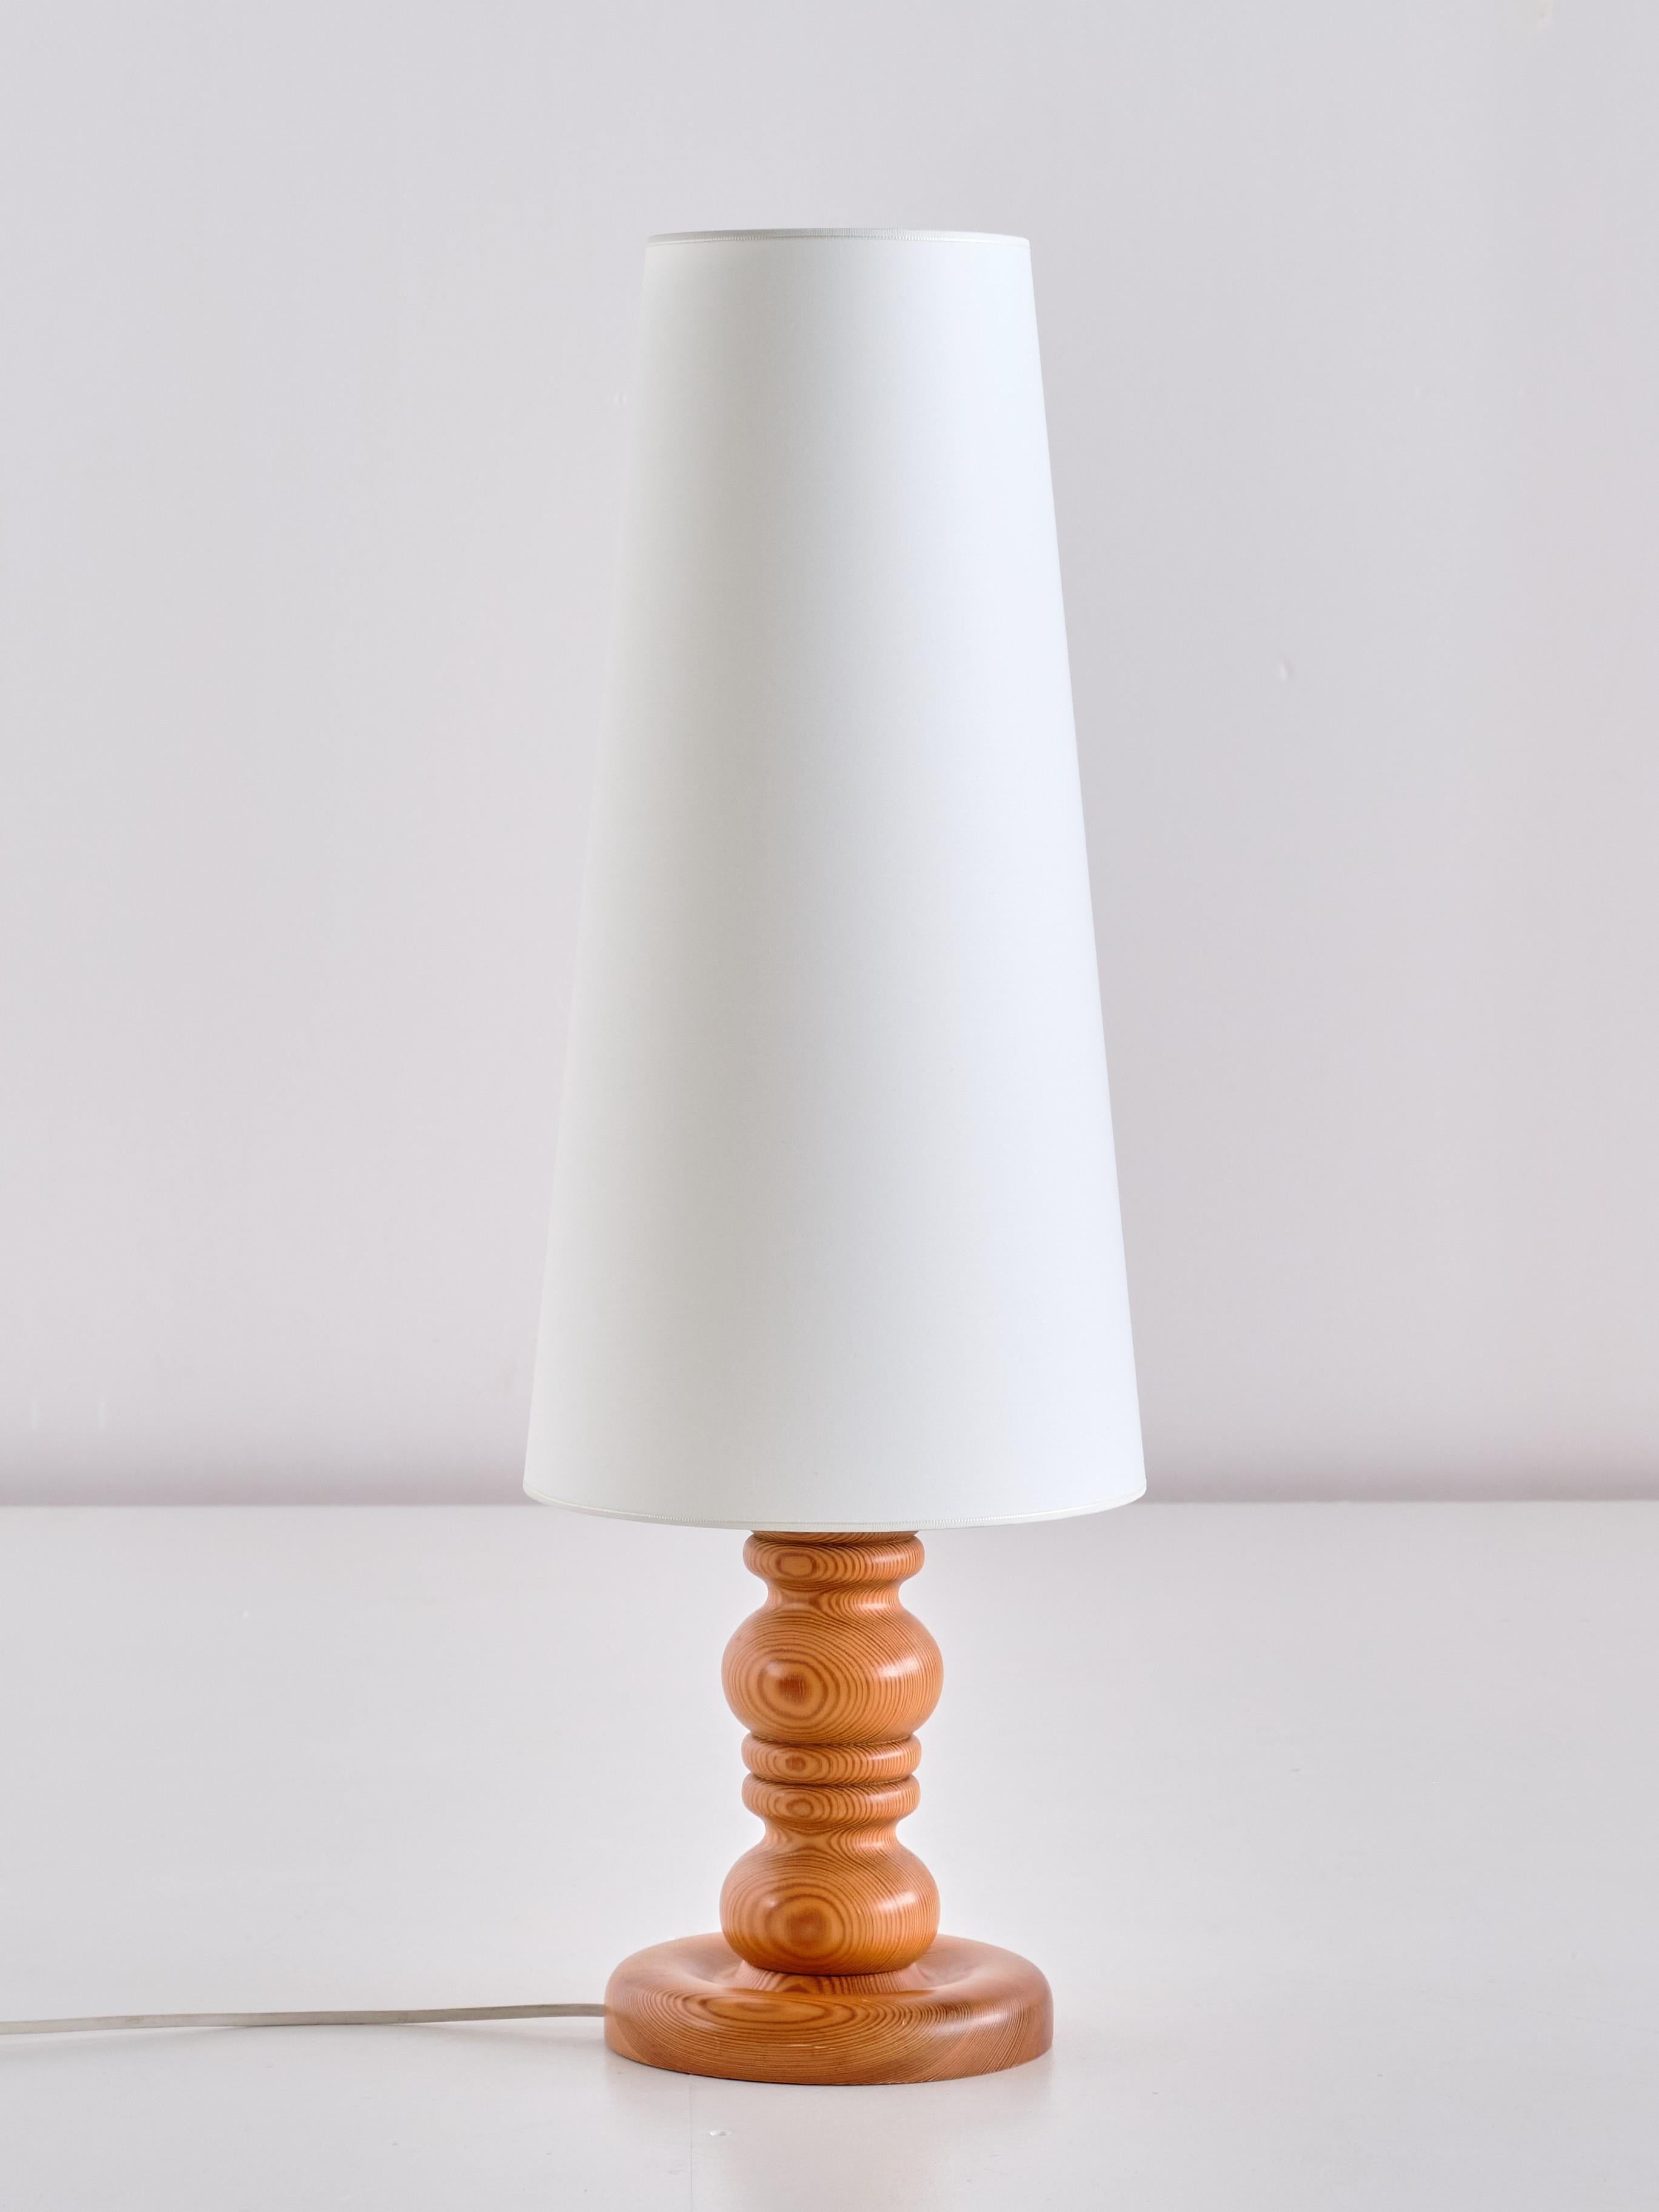 Late 20th Century Markslöjd Table Lamp in Solid Pine, Kinna, Sweden, Early 1970s